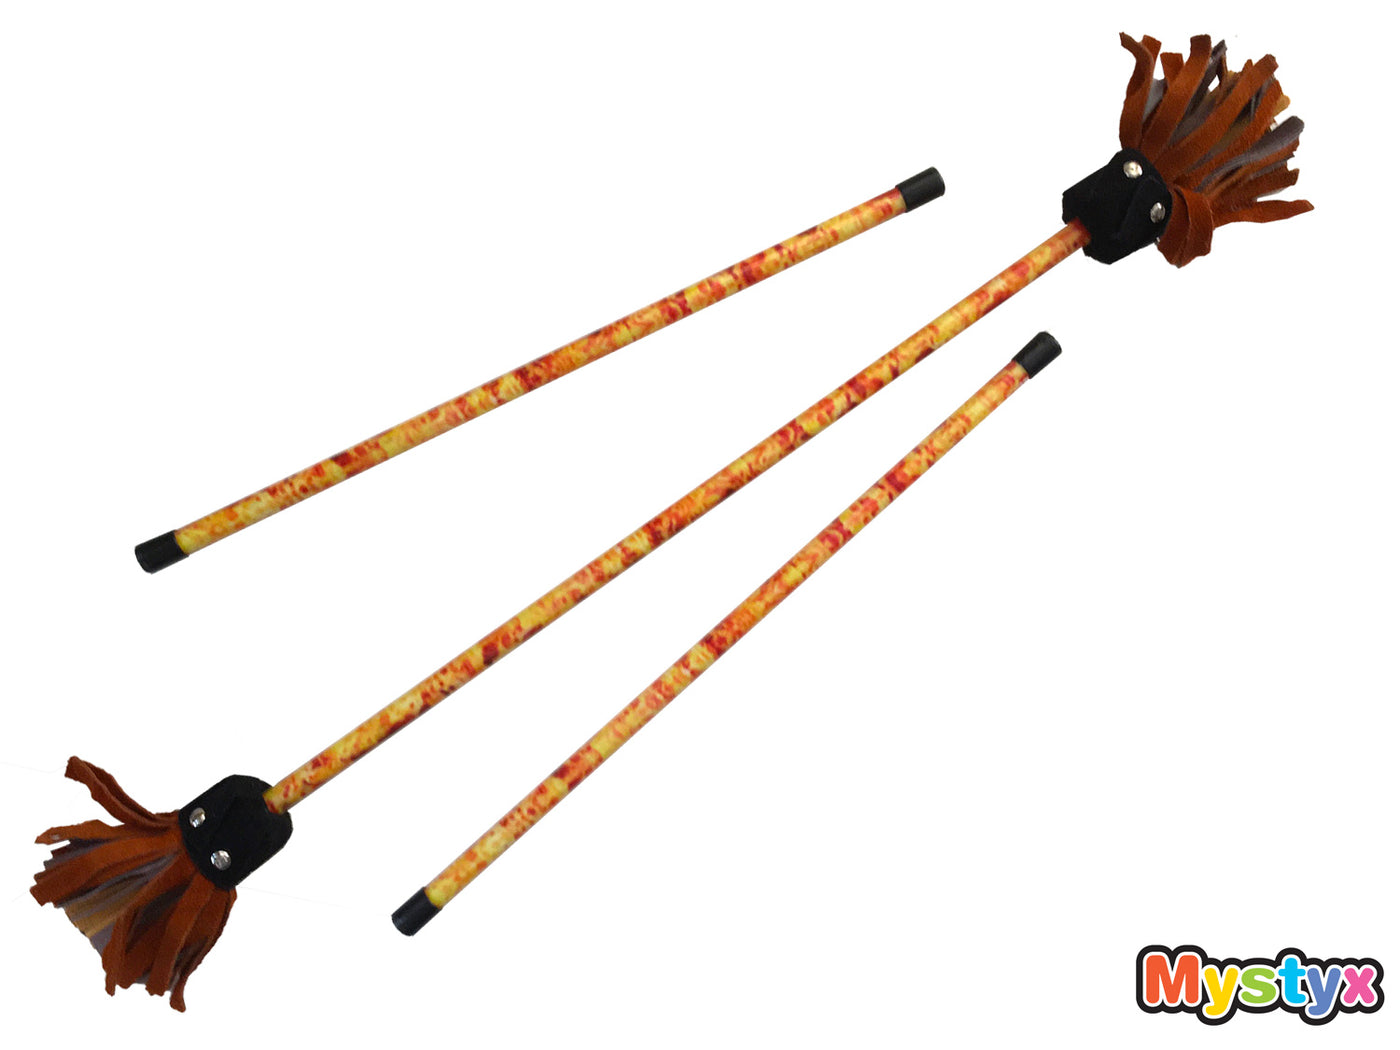 MyStyx Devil Staff / Flower Staff Silicone &amp; Leather - Fire Pattern - Complete Kit